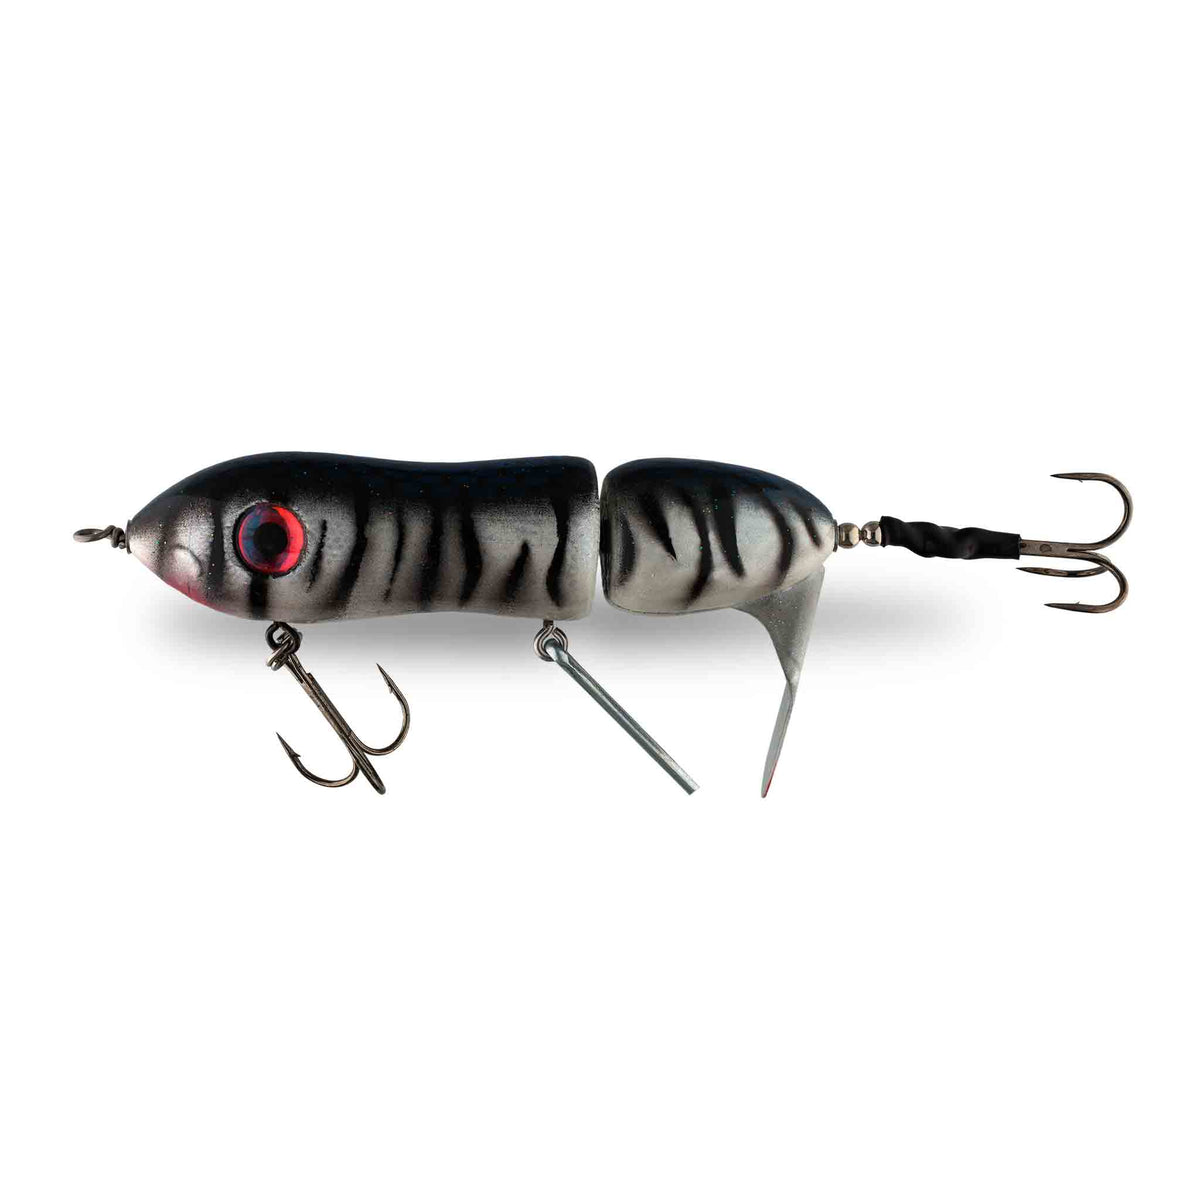 View of Topwater Big Mama Twis'td Sis'tr Clicker Propbait Charged Cisco available at EZOKO Pike and Musky Shop